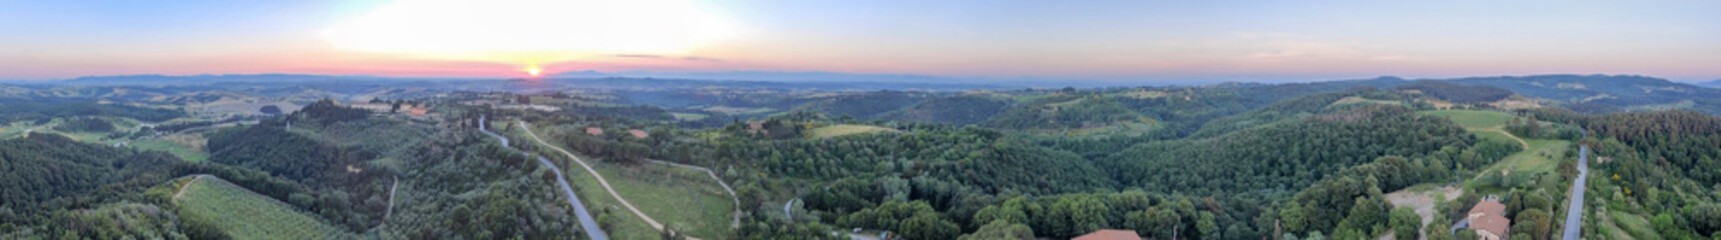 Amazing sunset panoramic aerial view of Tuscany hills in spring season - Italy